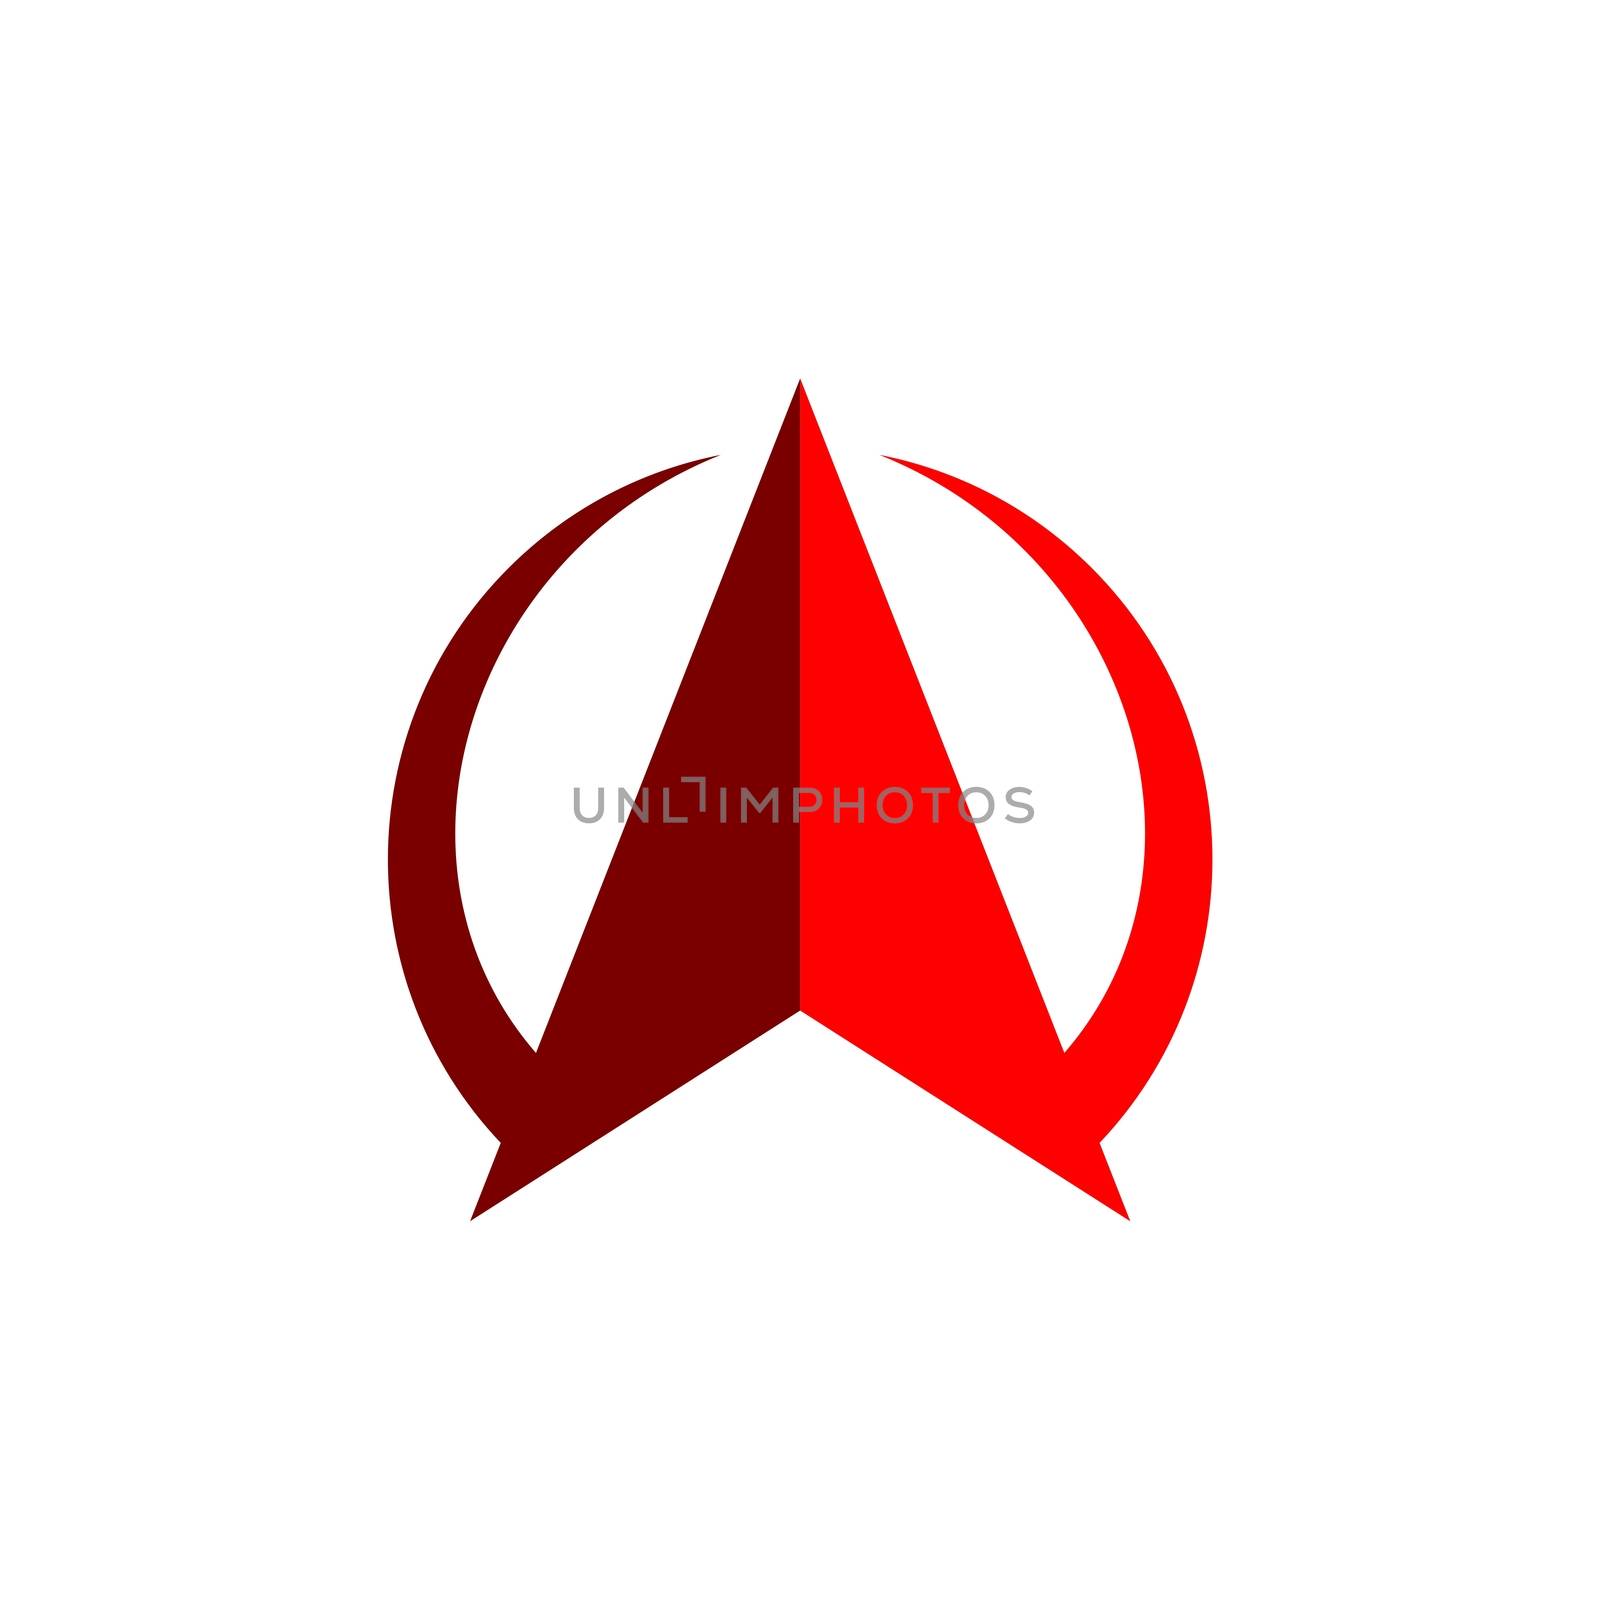 Red Up Arrow in Circle Logo Template Illustration Design. Vector EPS 10.